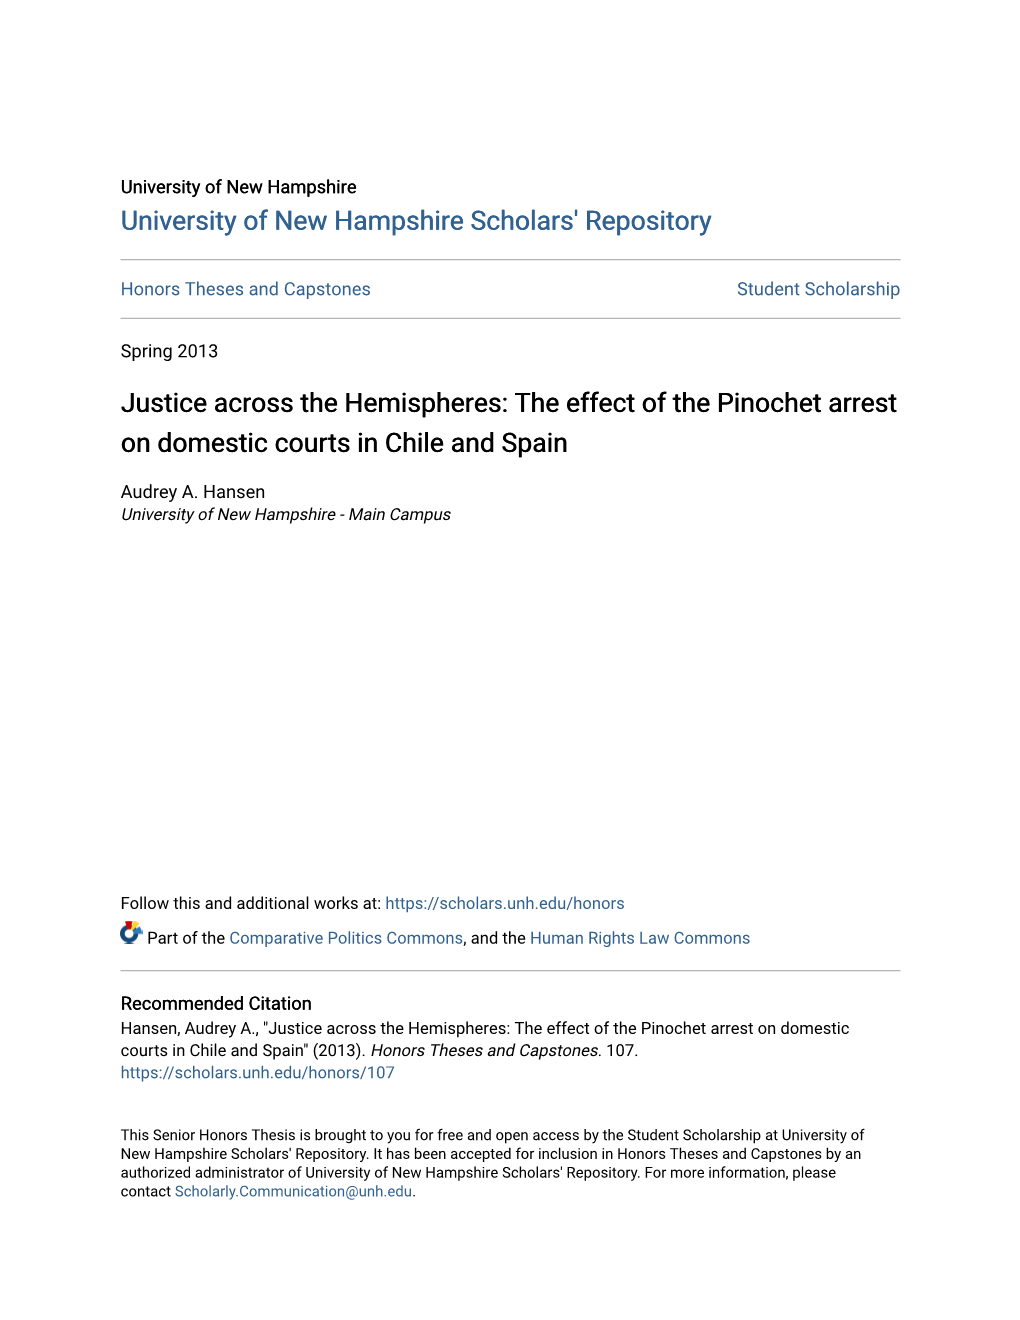 Justice Across the Hemispheres: the Effect of the Pinochet Arrest on Domestic Courts in Chile and Spain